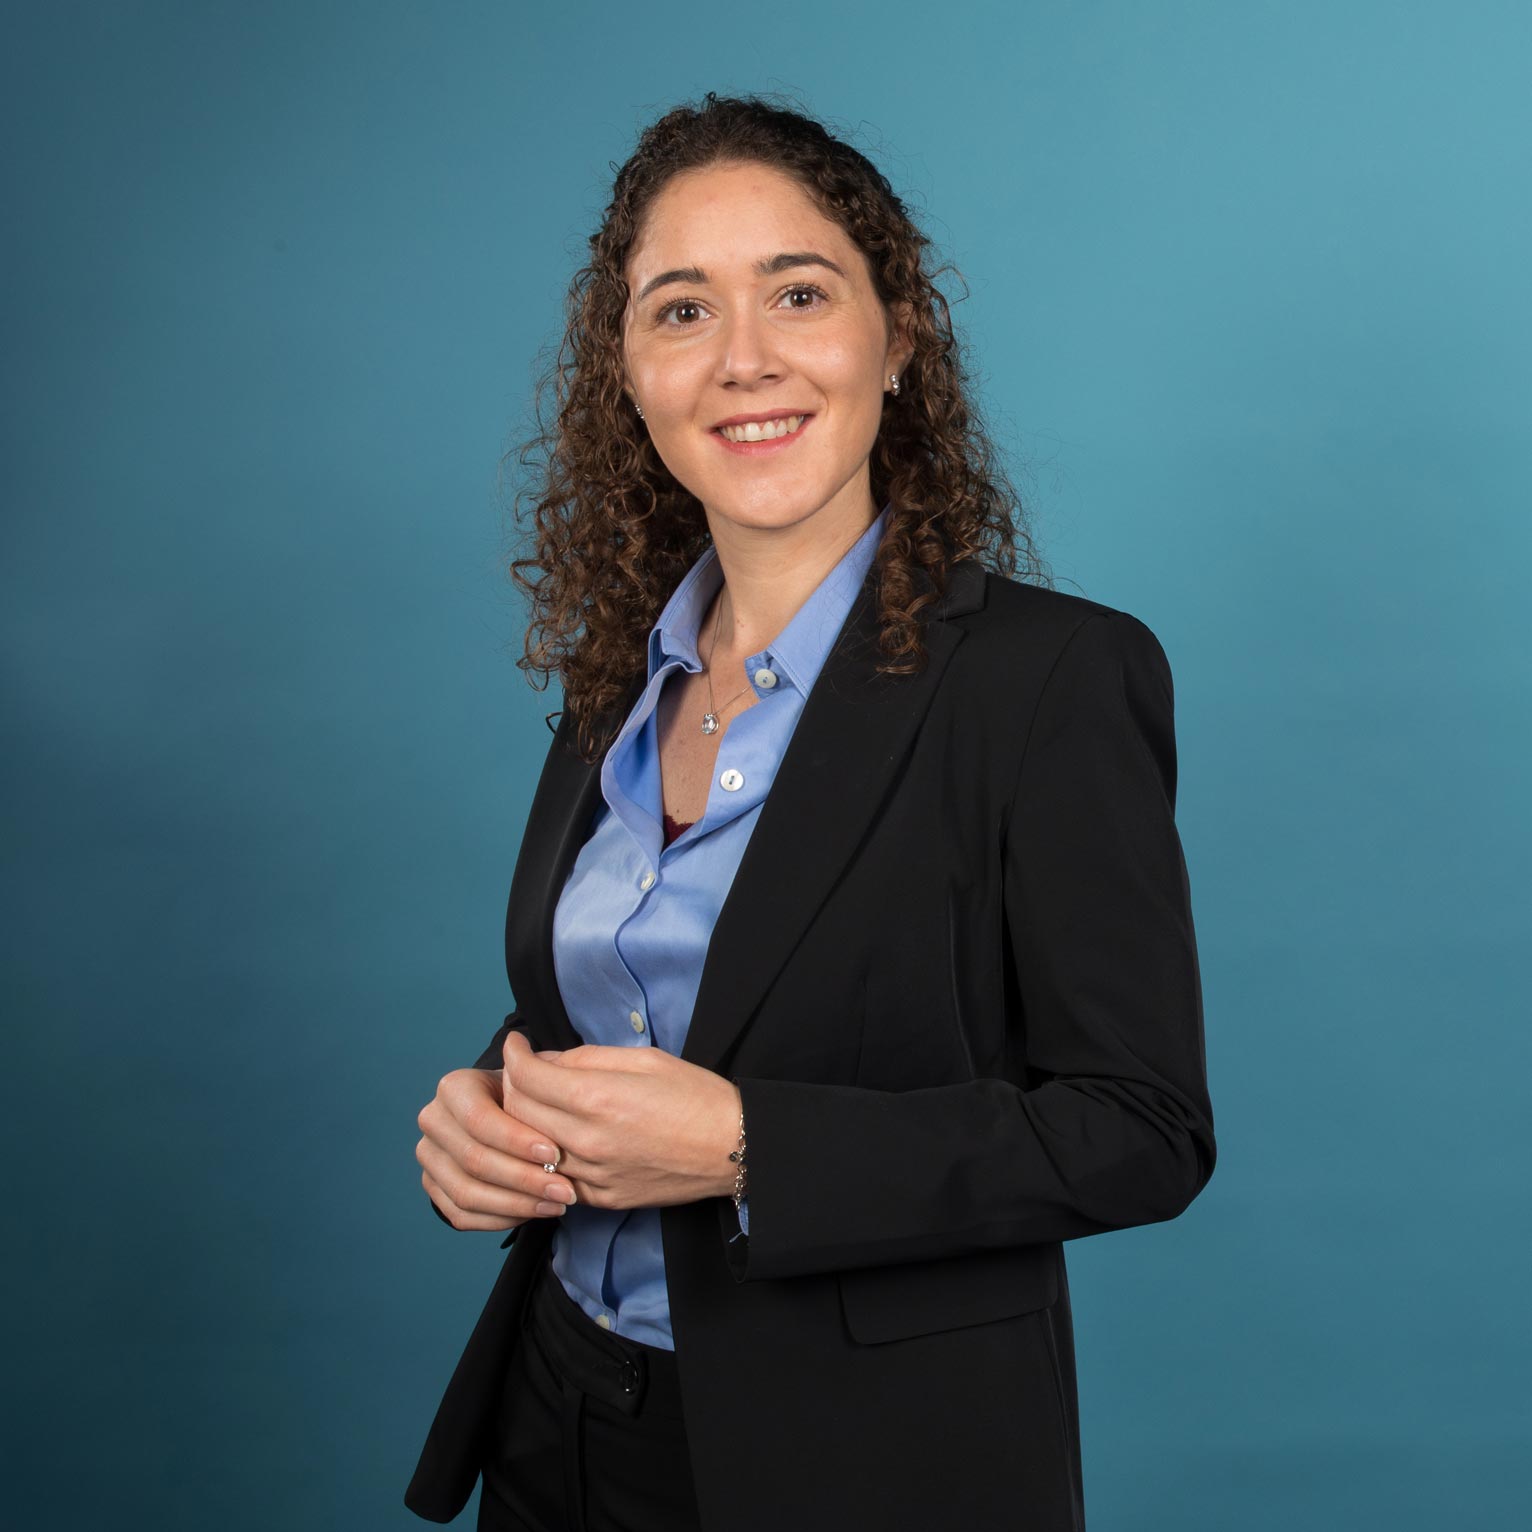 Michela Carlana is Assistant Professor of Public Policy at the Harvard Kennedy School